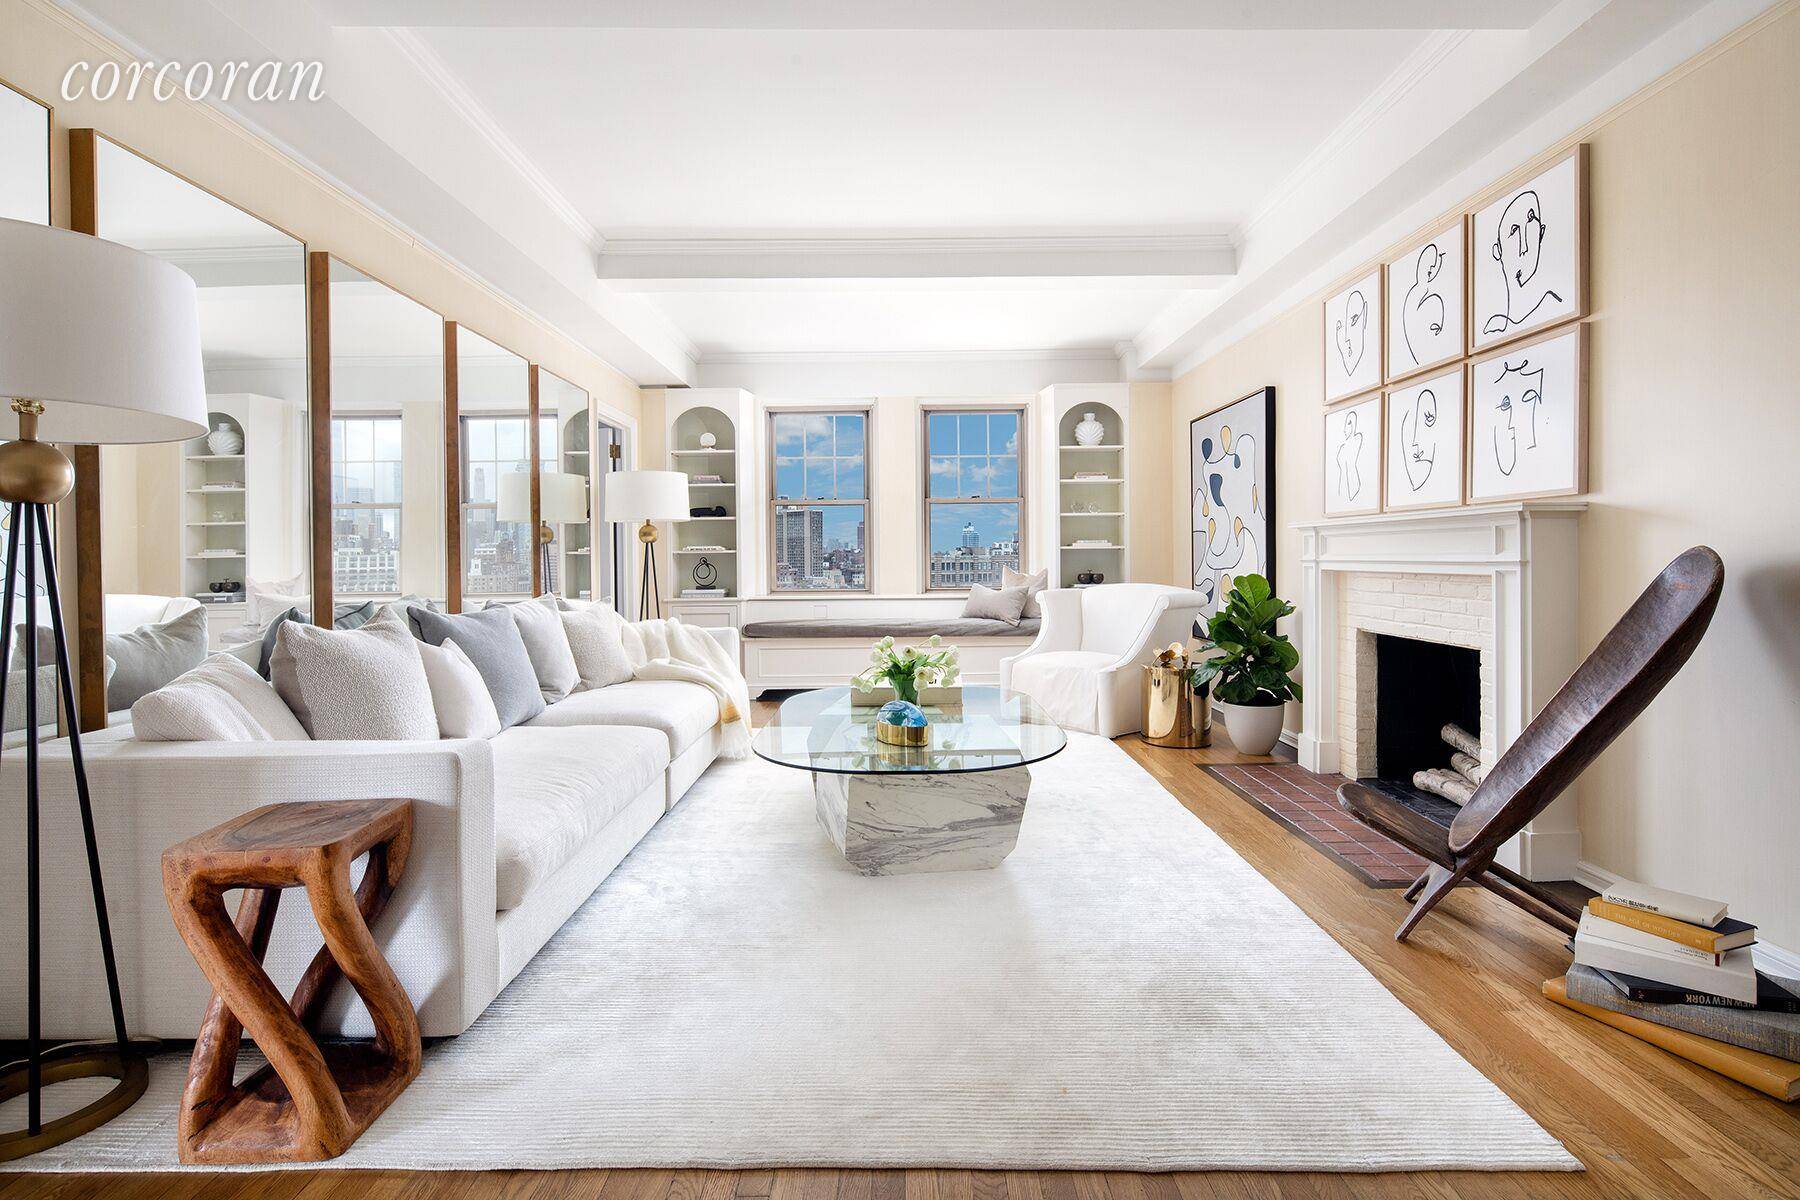 A stunning jewel box in the heart of West Village.